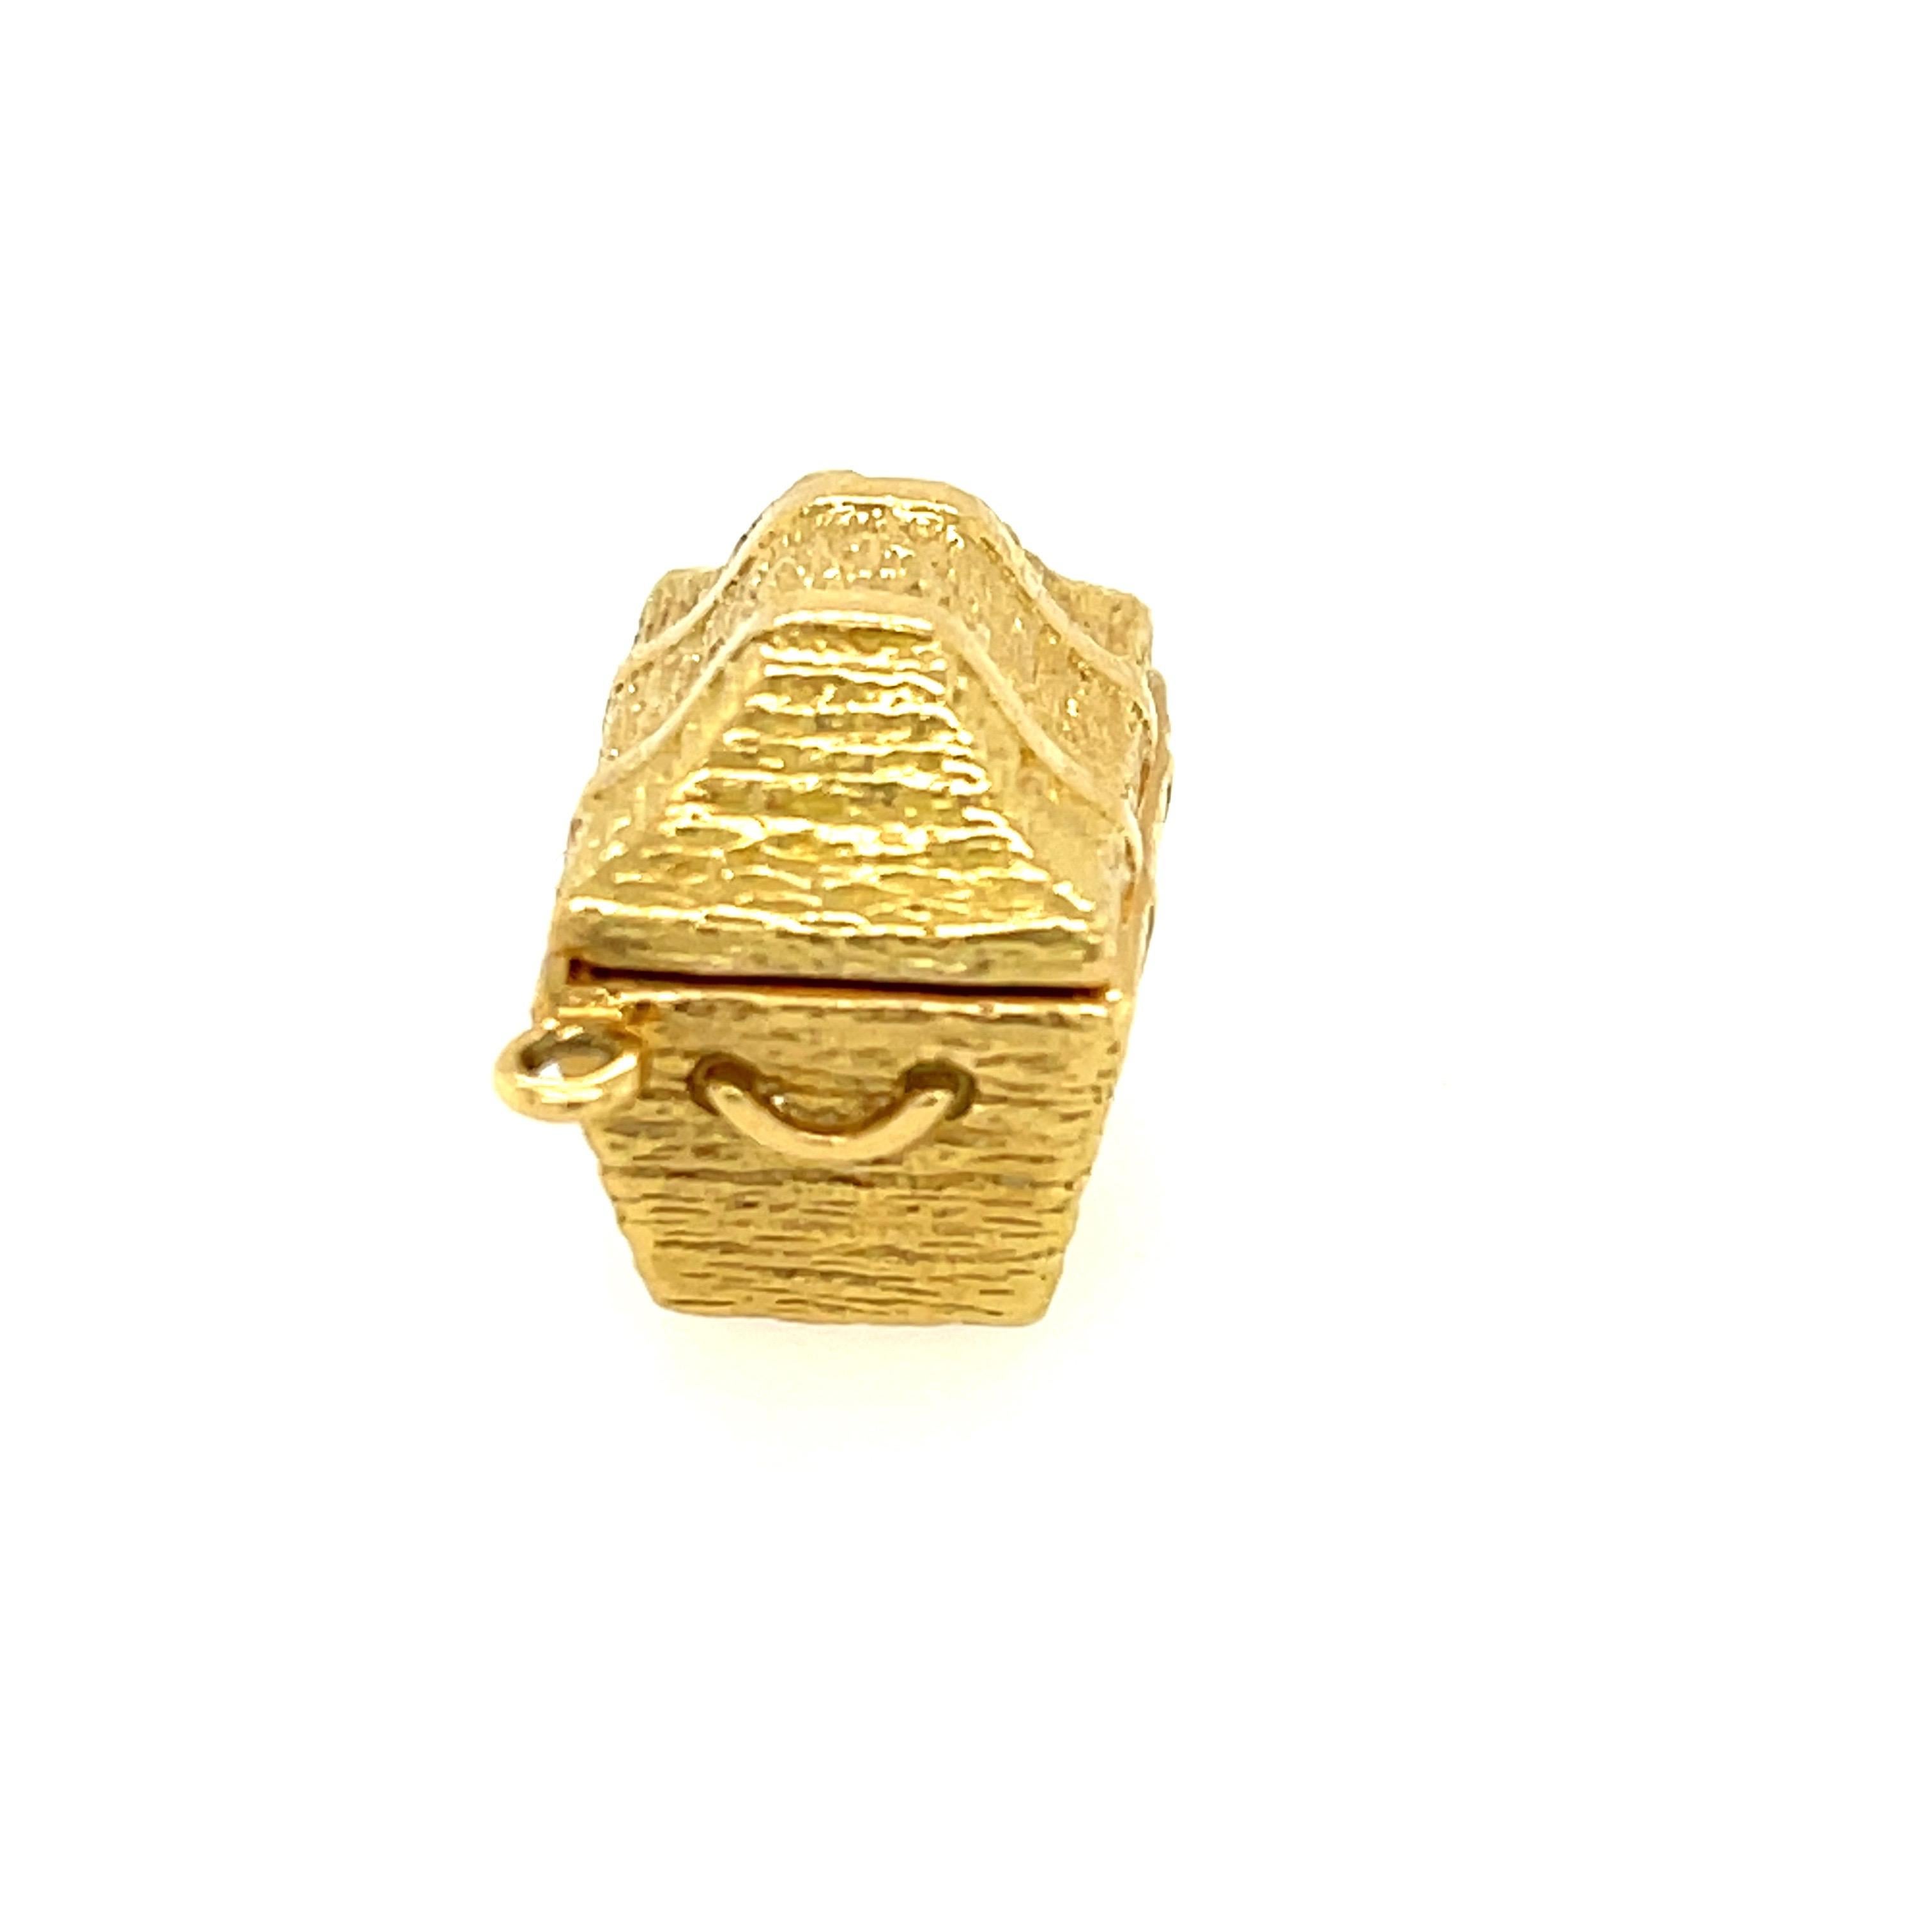 Women's or Men's Vintage Tiffany & Co. 18 Karat Gold Treasure Chest Charm with Gems